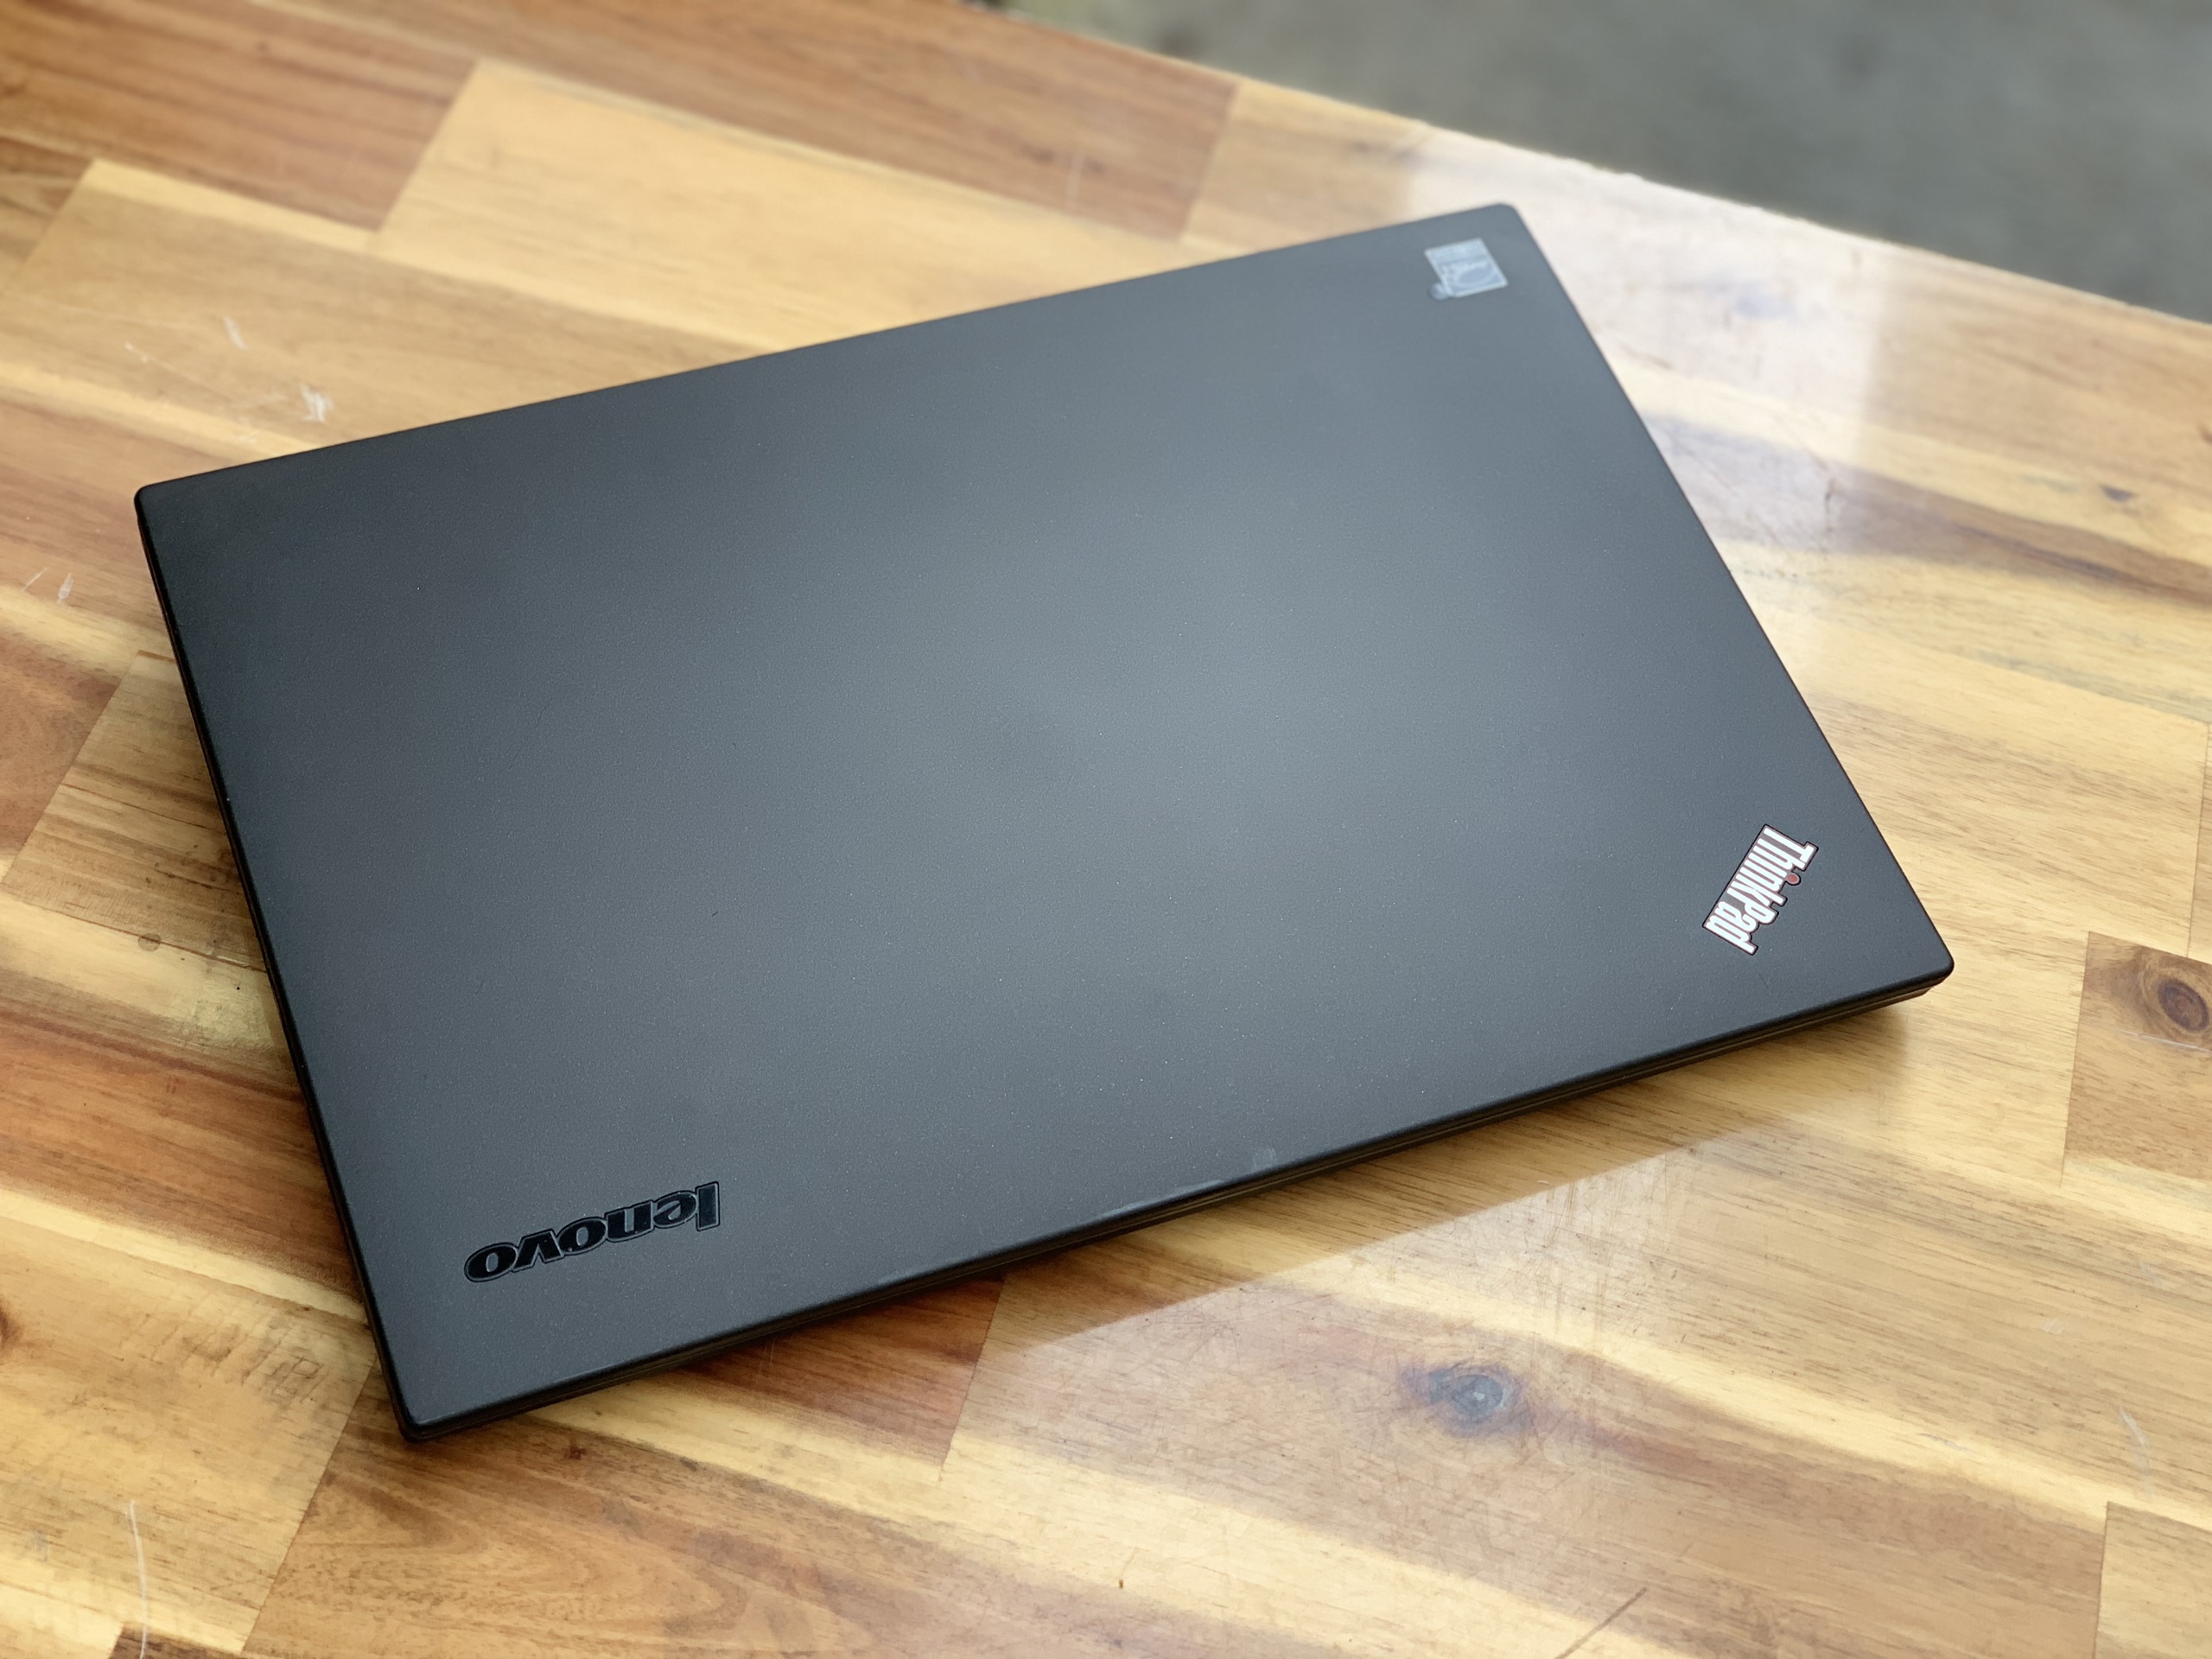 Laptop Lenovo Thinkpad X240/ Core i7 Haswell/ 4G/ SSD128 -500G/ 12/5in/ Win 10/ Giá rẻ